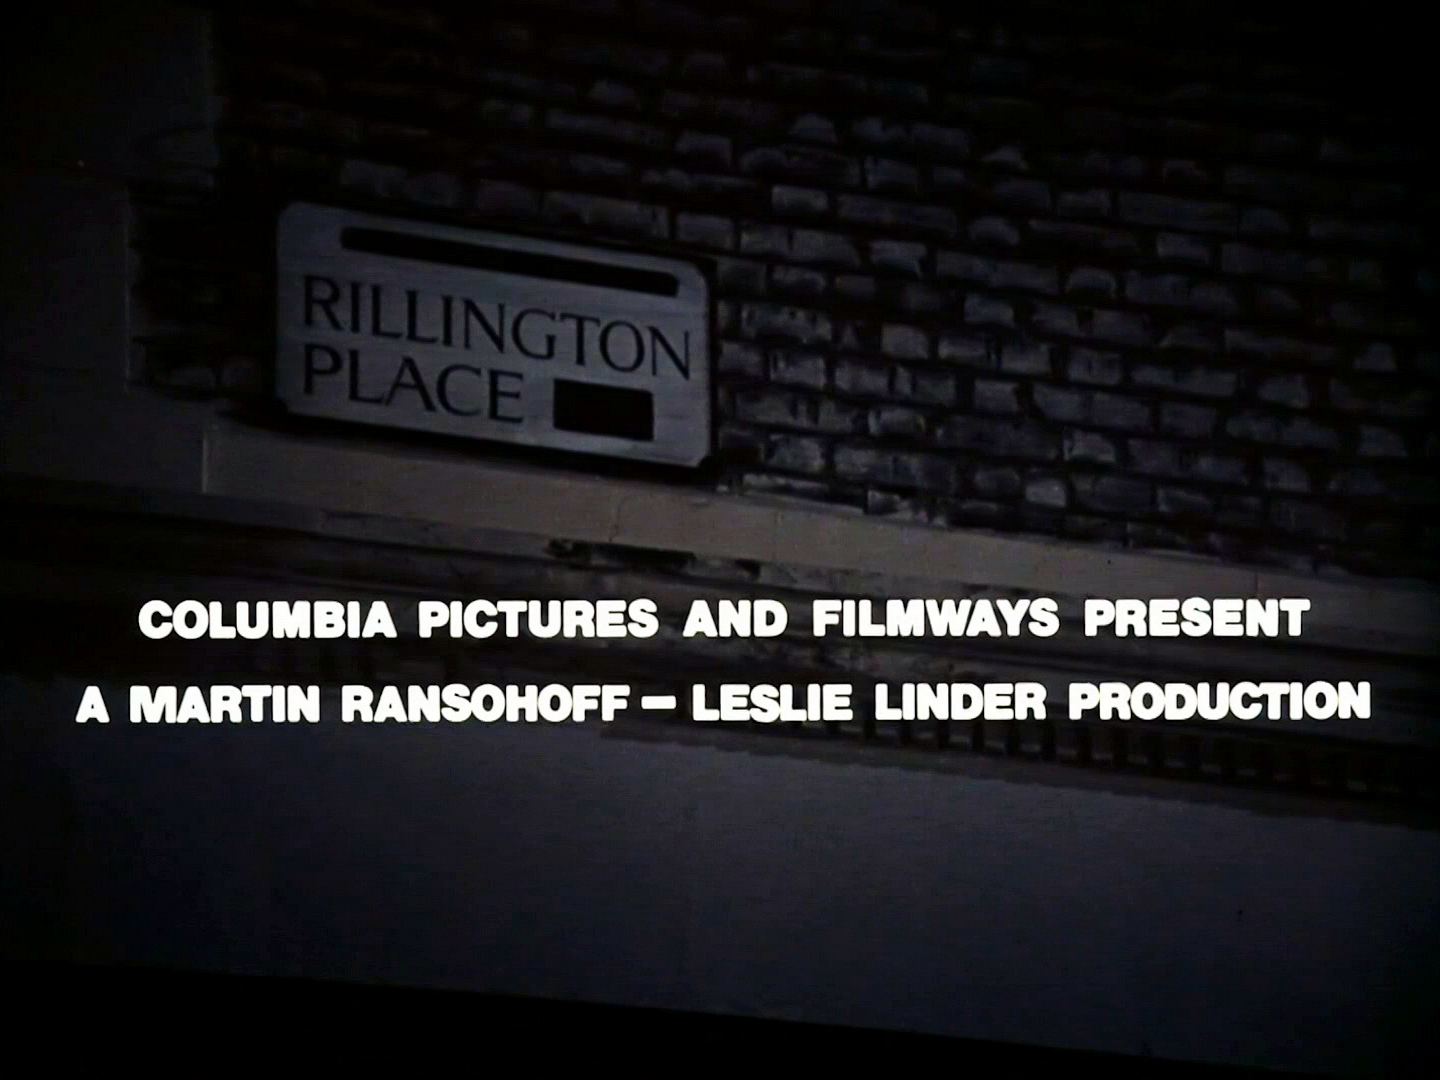 Main title from 10 Rillington Place (1971) (2). Columbia Pictures and Filmways present a Martin Ransohoff – Leslie Linder production